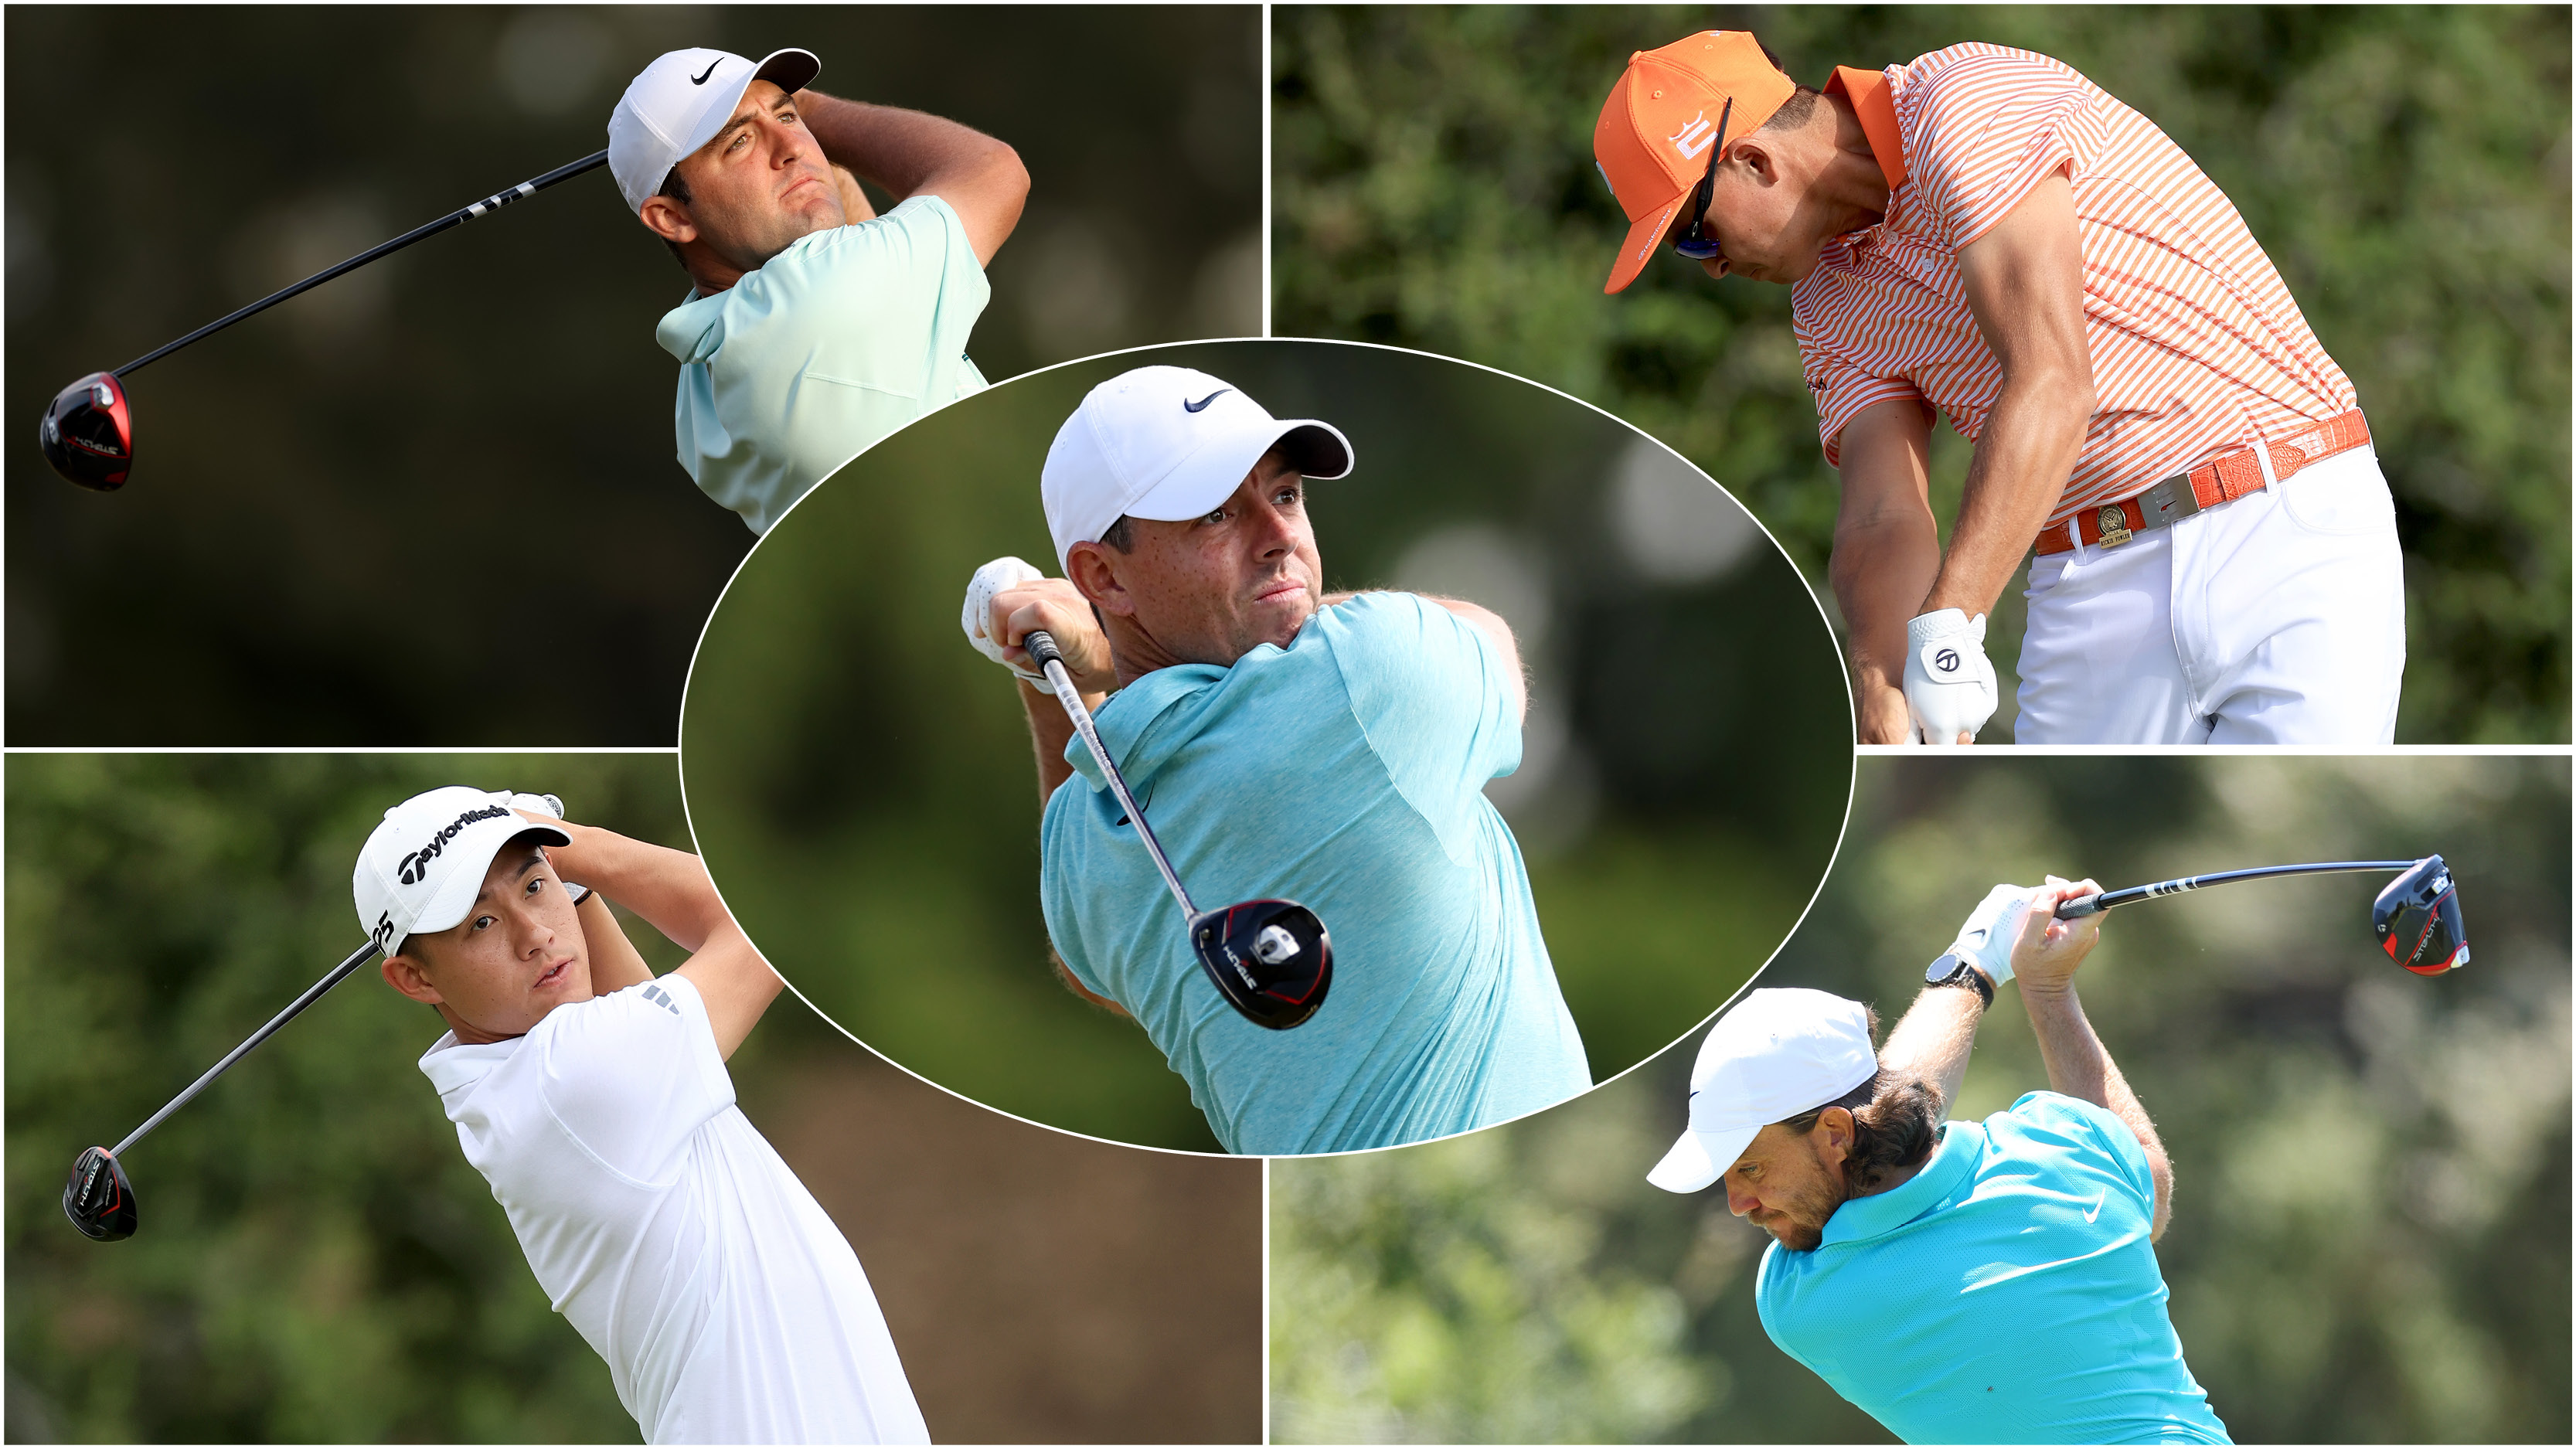 5 Big Names To Watch At The Travelers Championship